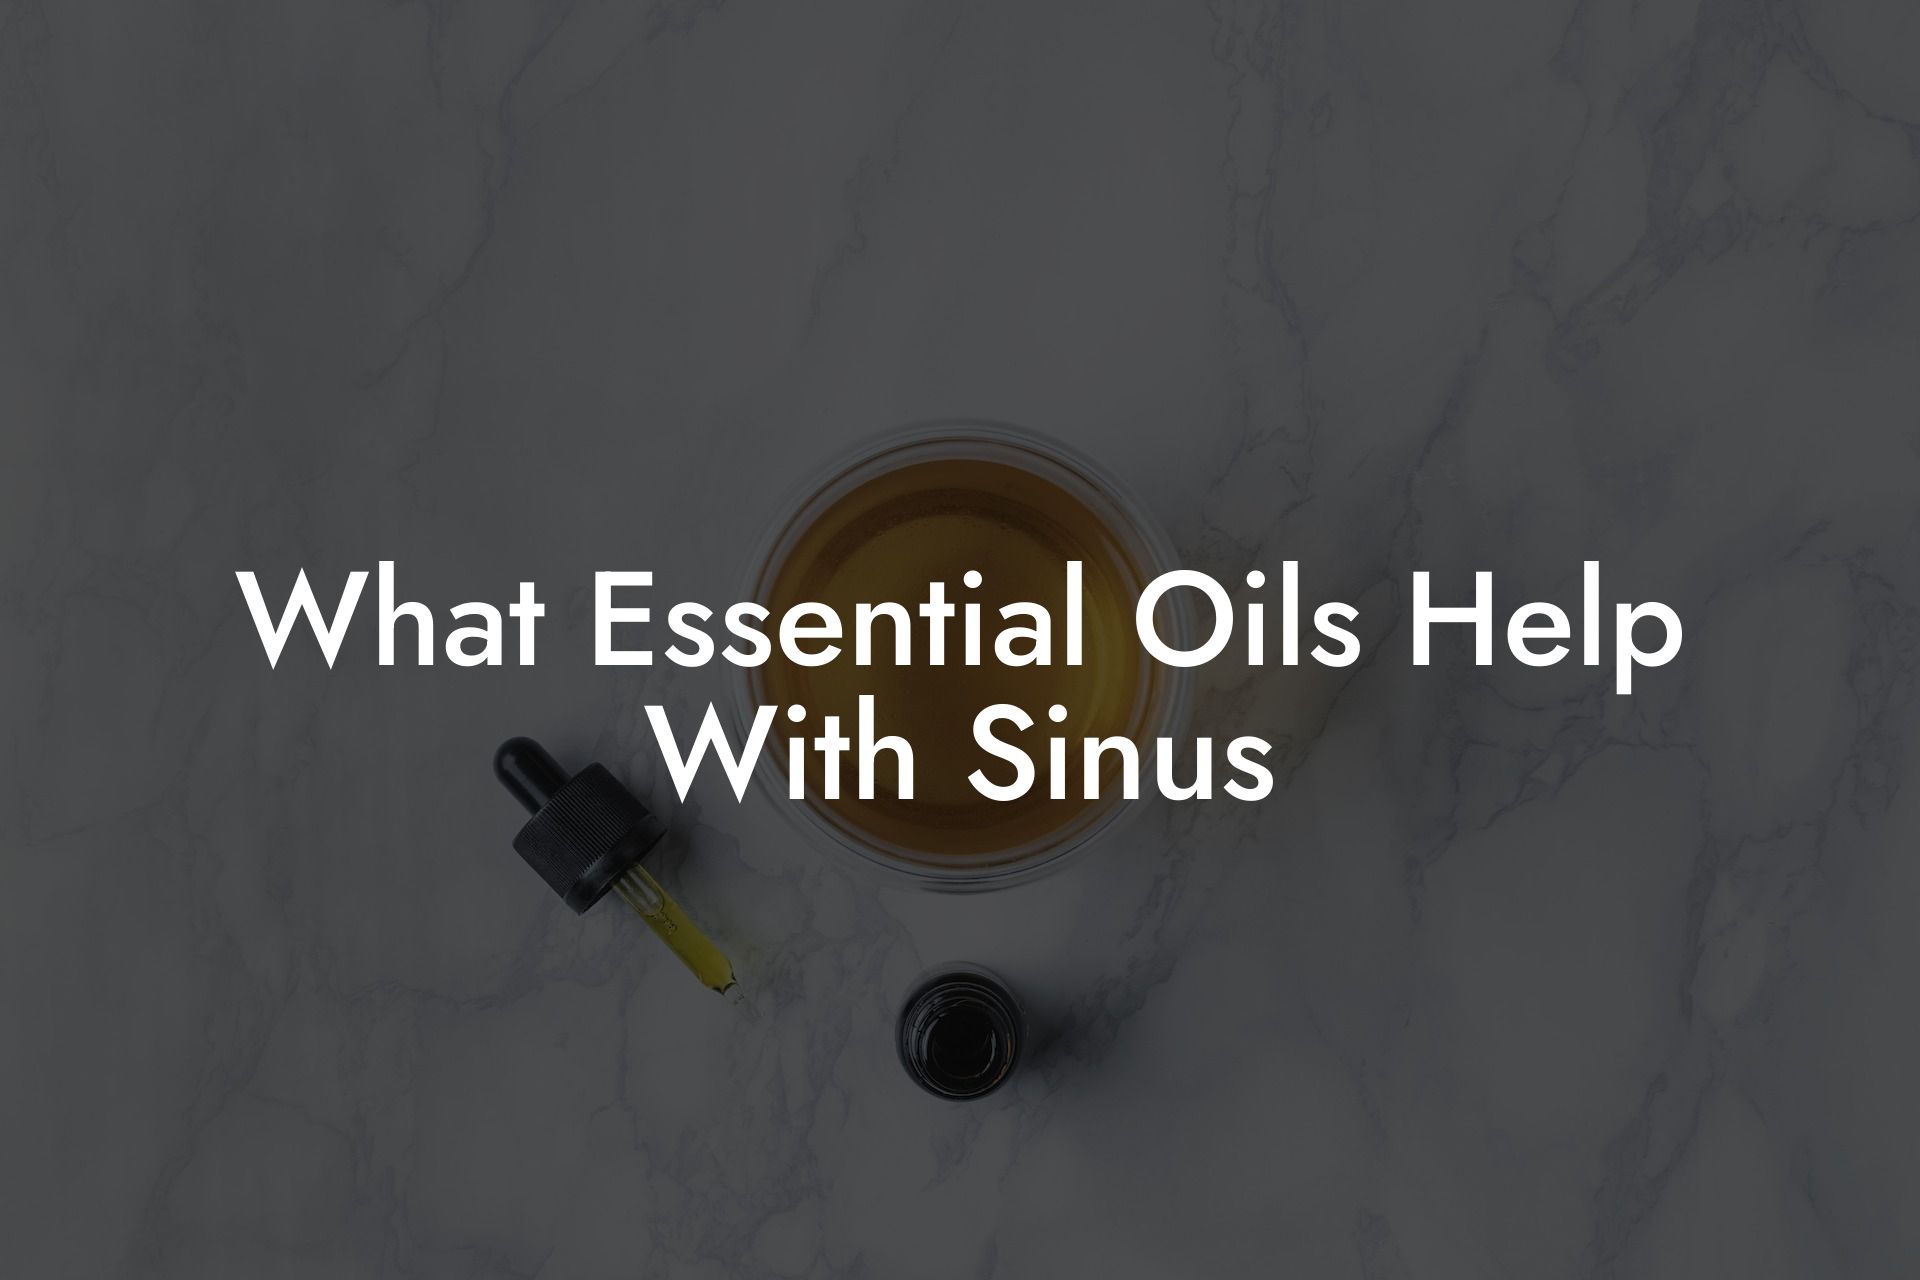 What Essential Oils Help With Sinus